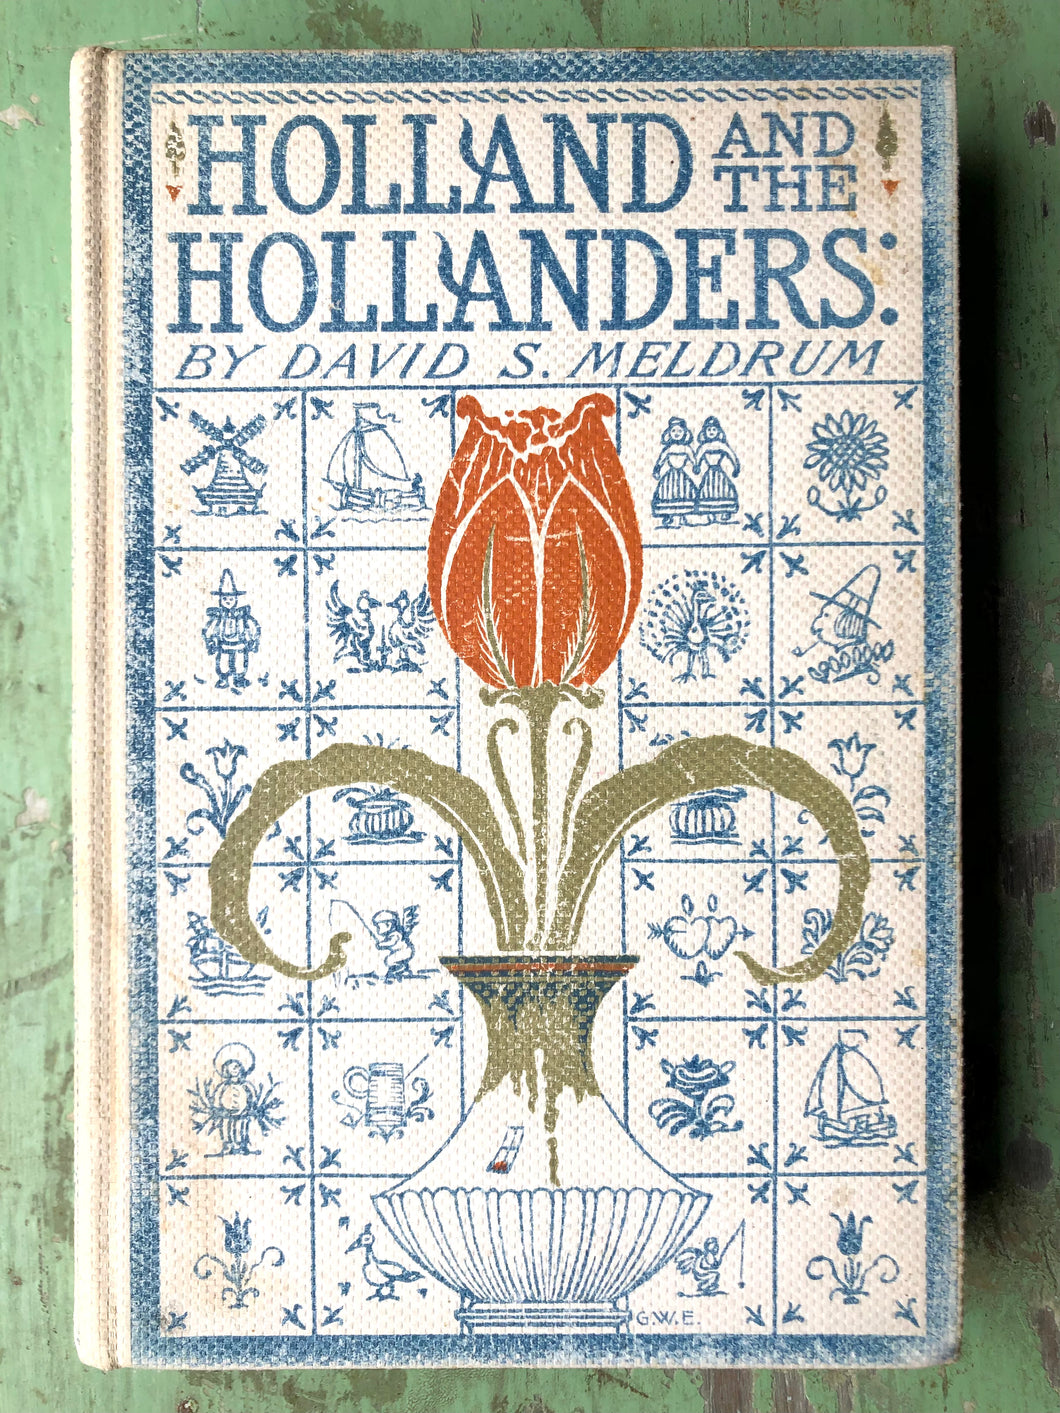 Holland and the Hollanders. by David S. Meldrum